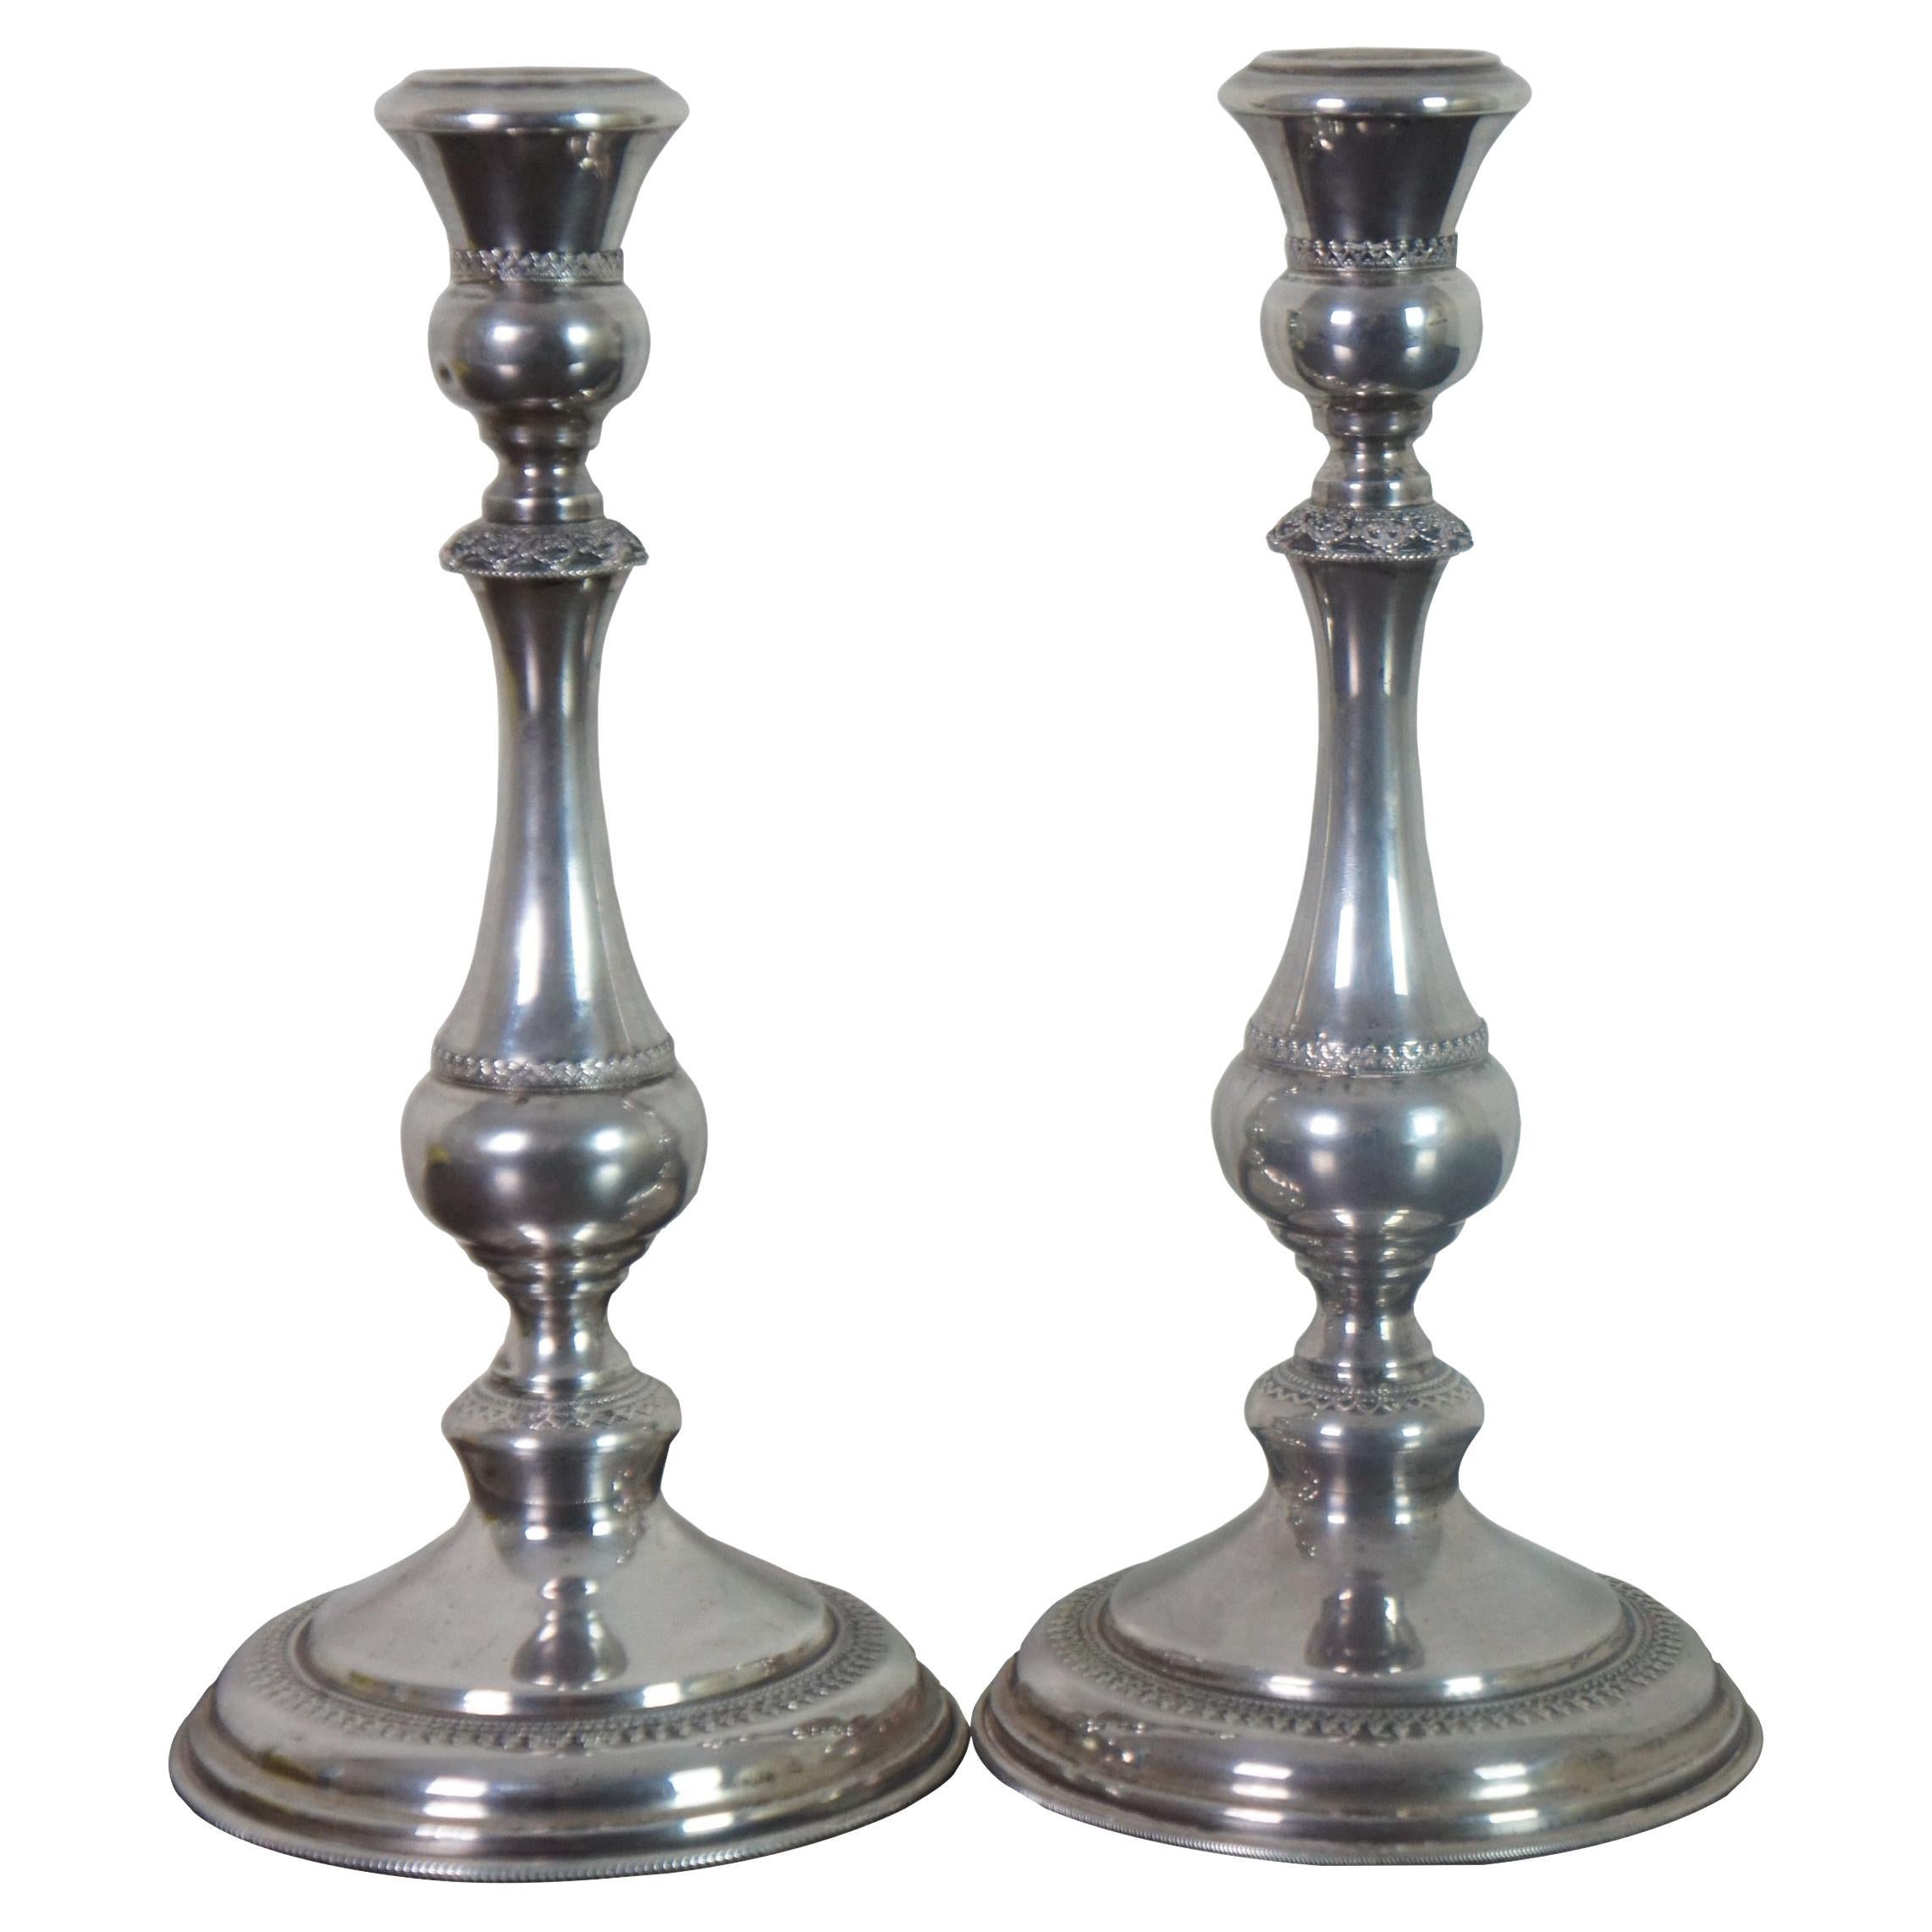 Israeli Ben Zion Sterling Silver Shabbat Candlesticks Candle Holders Judaica For Sale